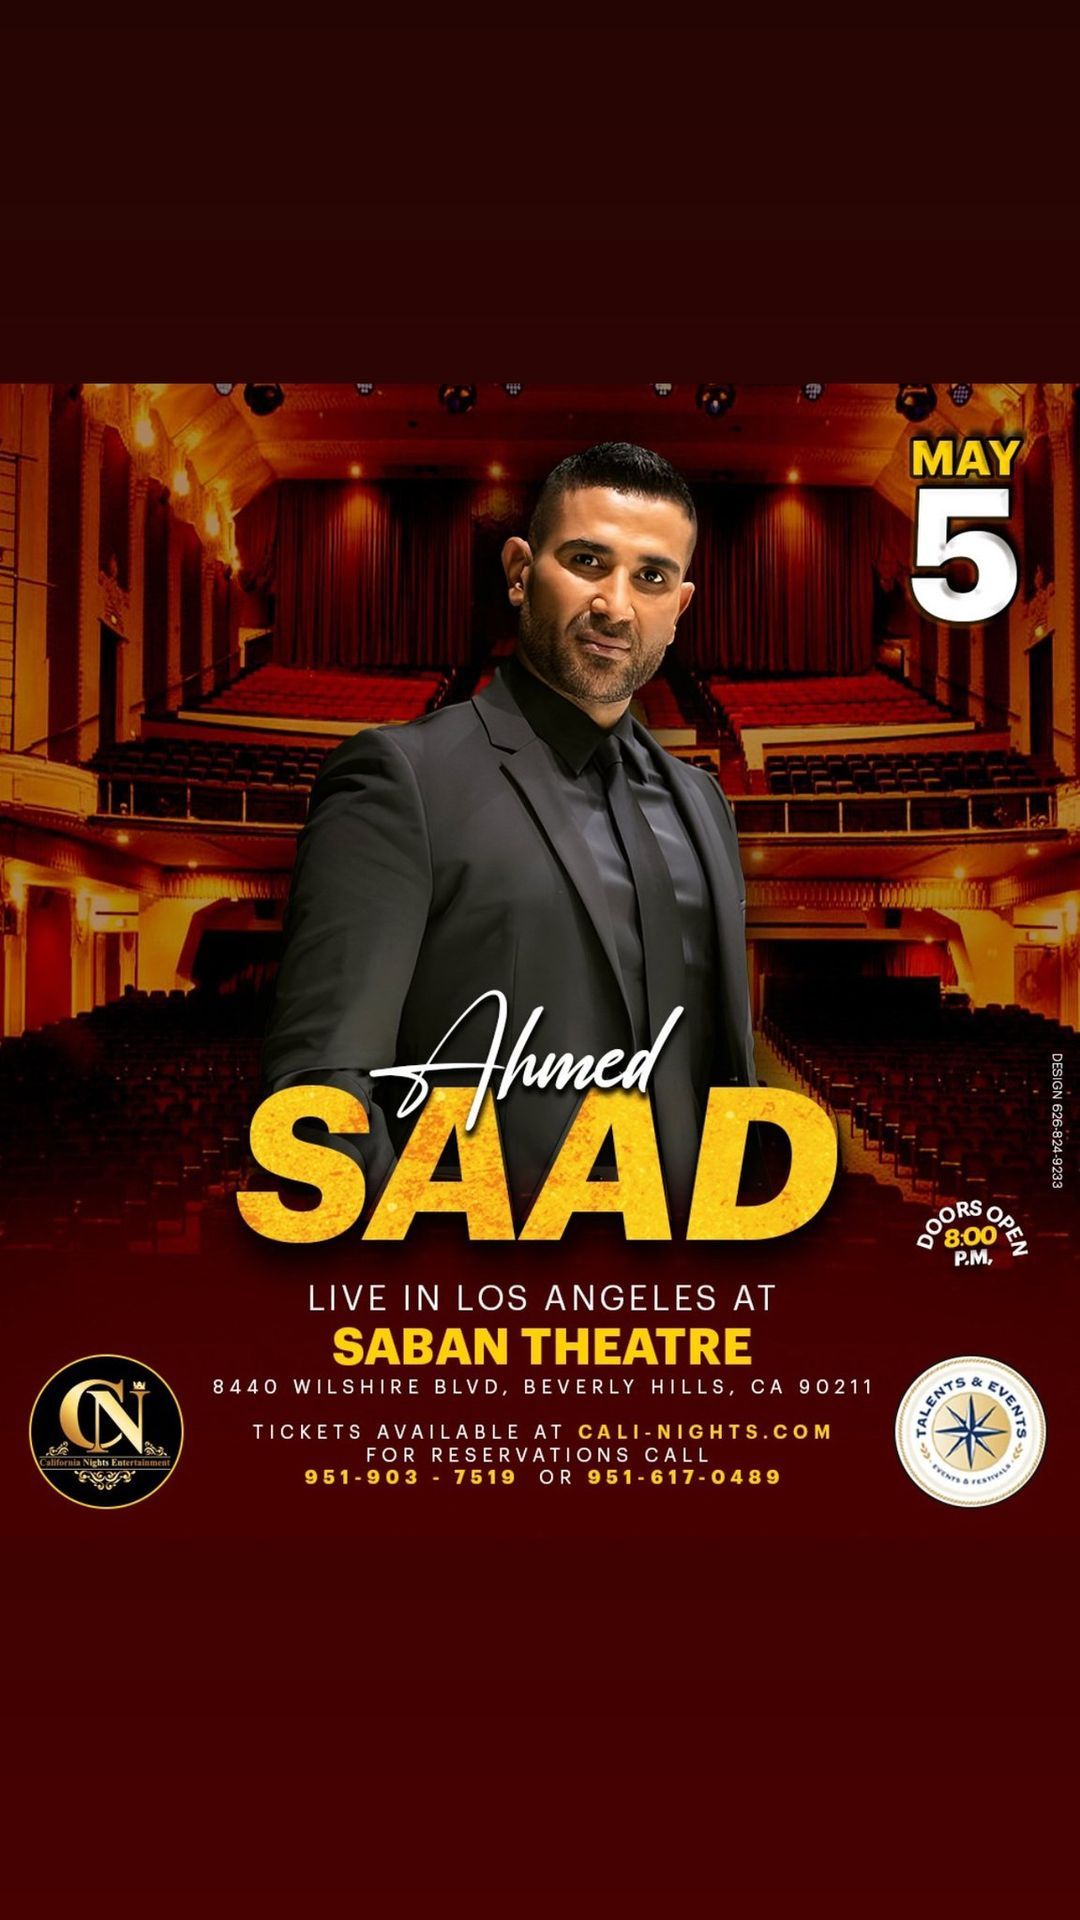 Concert for Ahmed Saad 